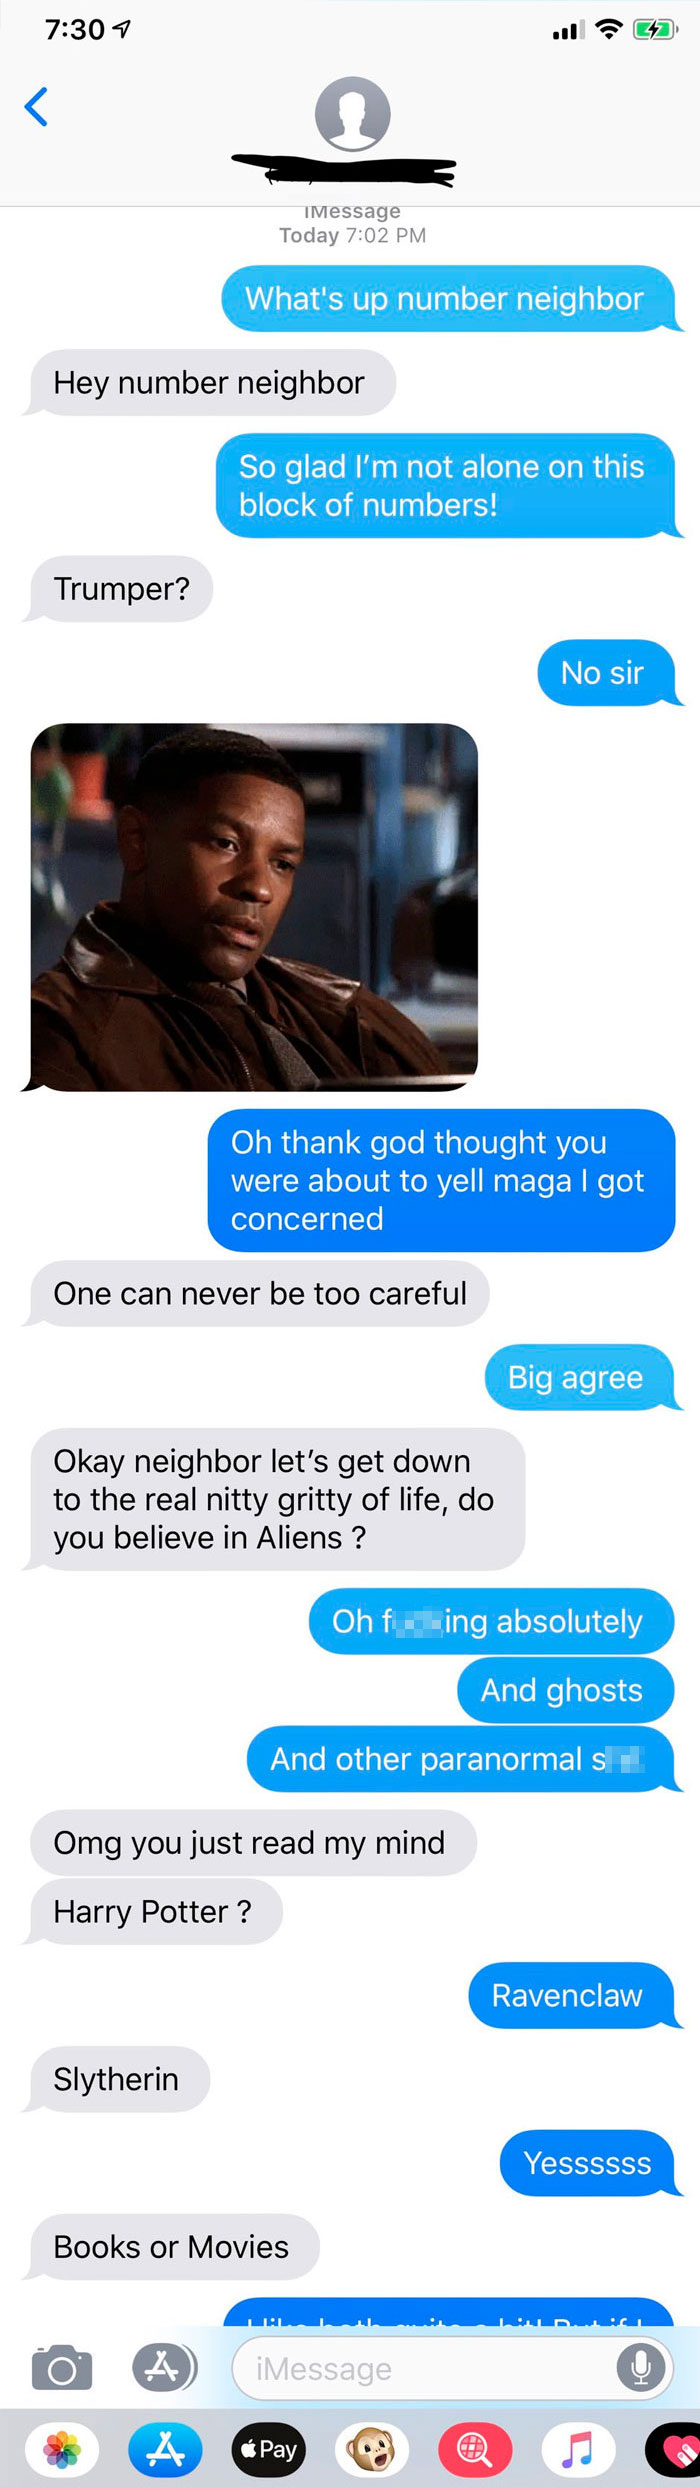 Cool Answers People Got After Texting Their Number Neighbors | Bored Panda